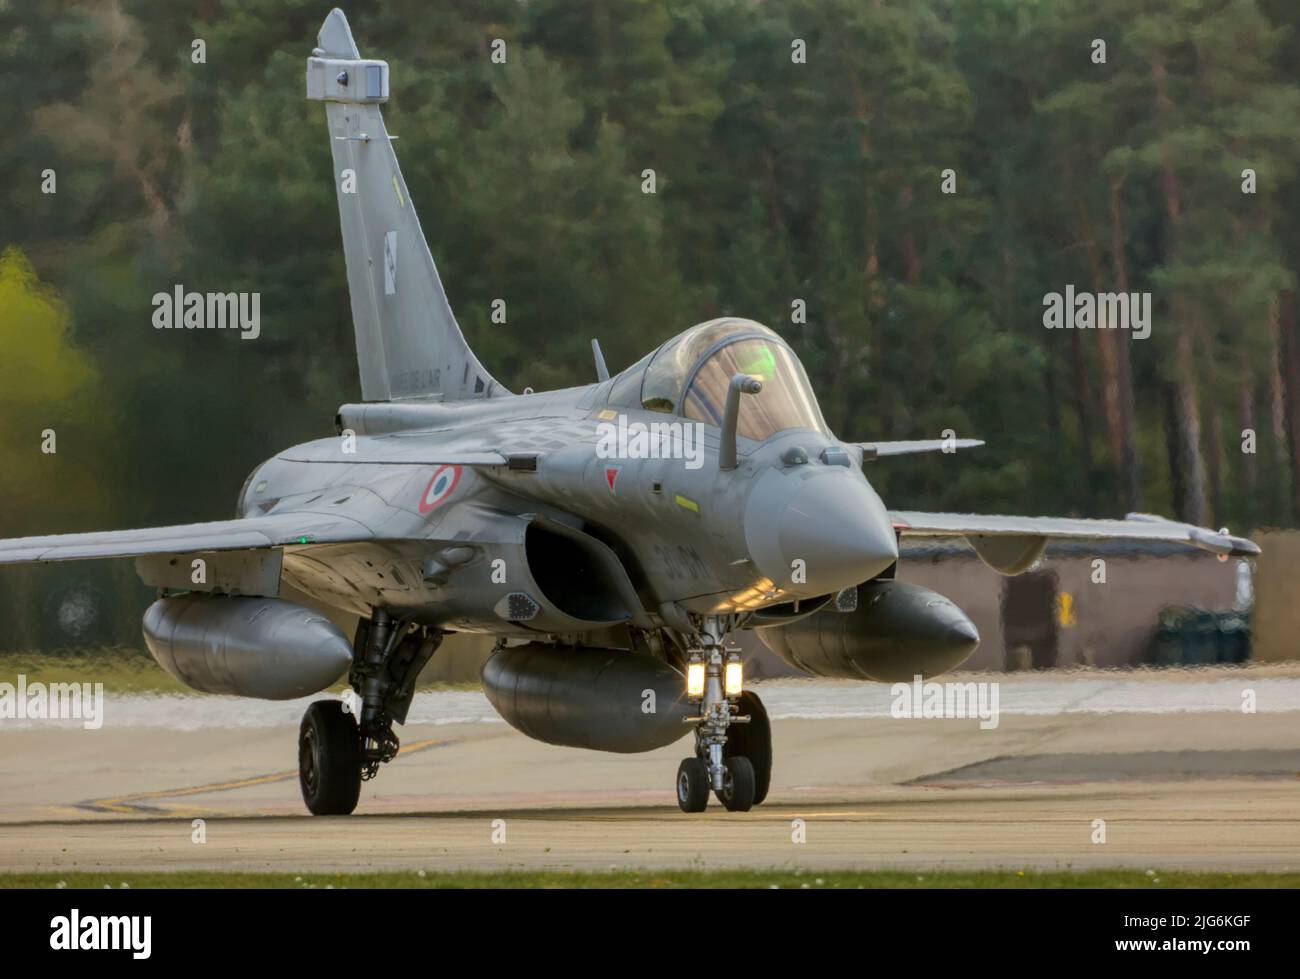 Dassault Rafale, a French twin-engine, canard delta wing, multirole fighter aircraft, seen here on an exercise at RAF Lakenheath, Suffolk, UK Stock Photo